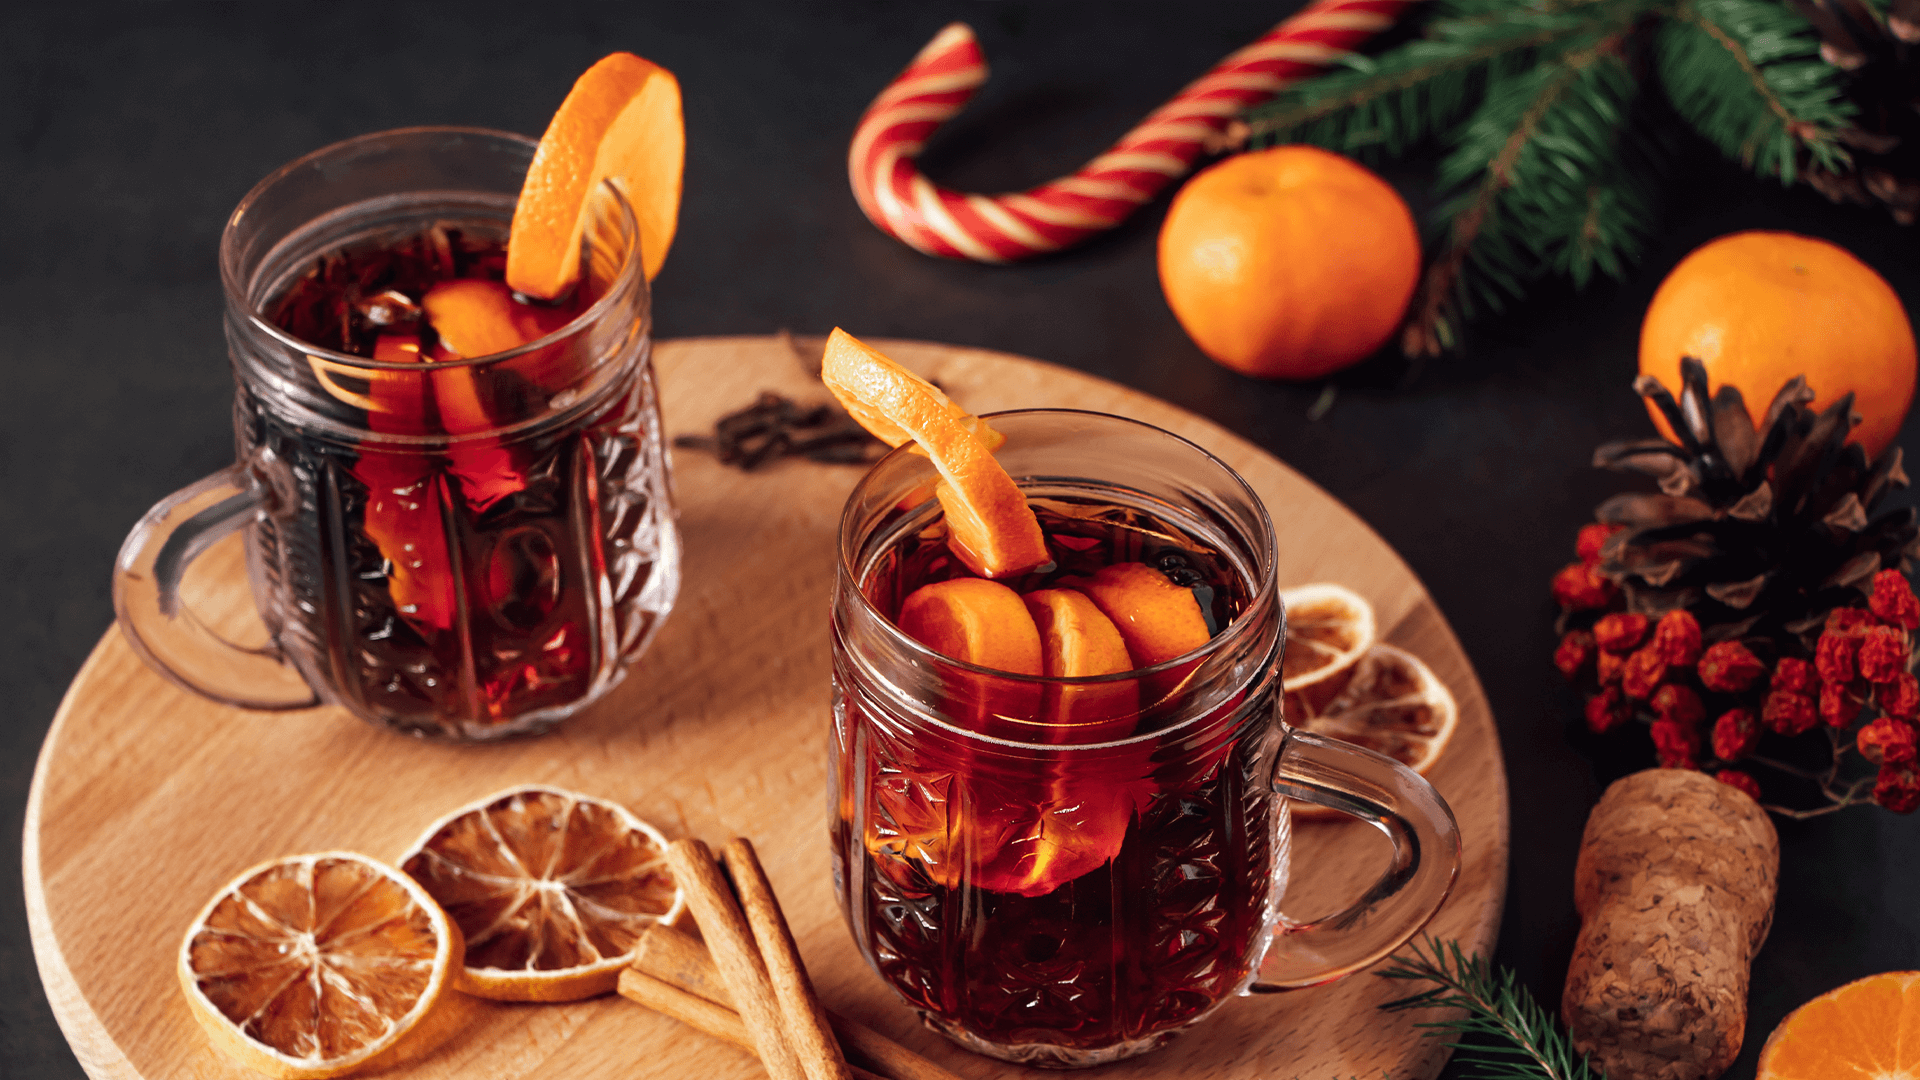 Two glasses of red mulled wine with slices of orange on the side, sit on a round wooden board with dried orange, candy canes and cinnamon sticks. In the background is pine foliage, whole oranges a cork and candy canes.